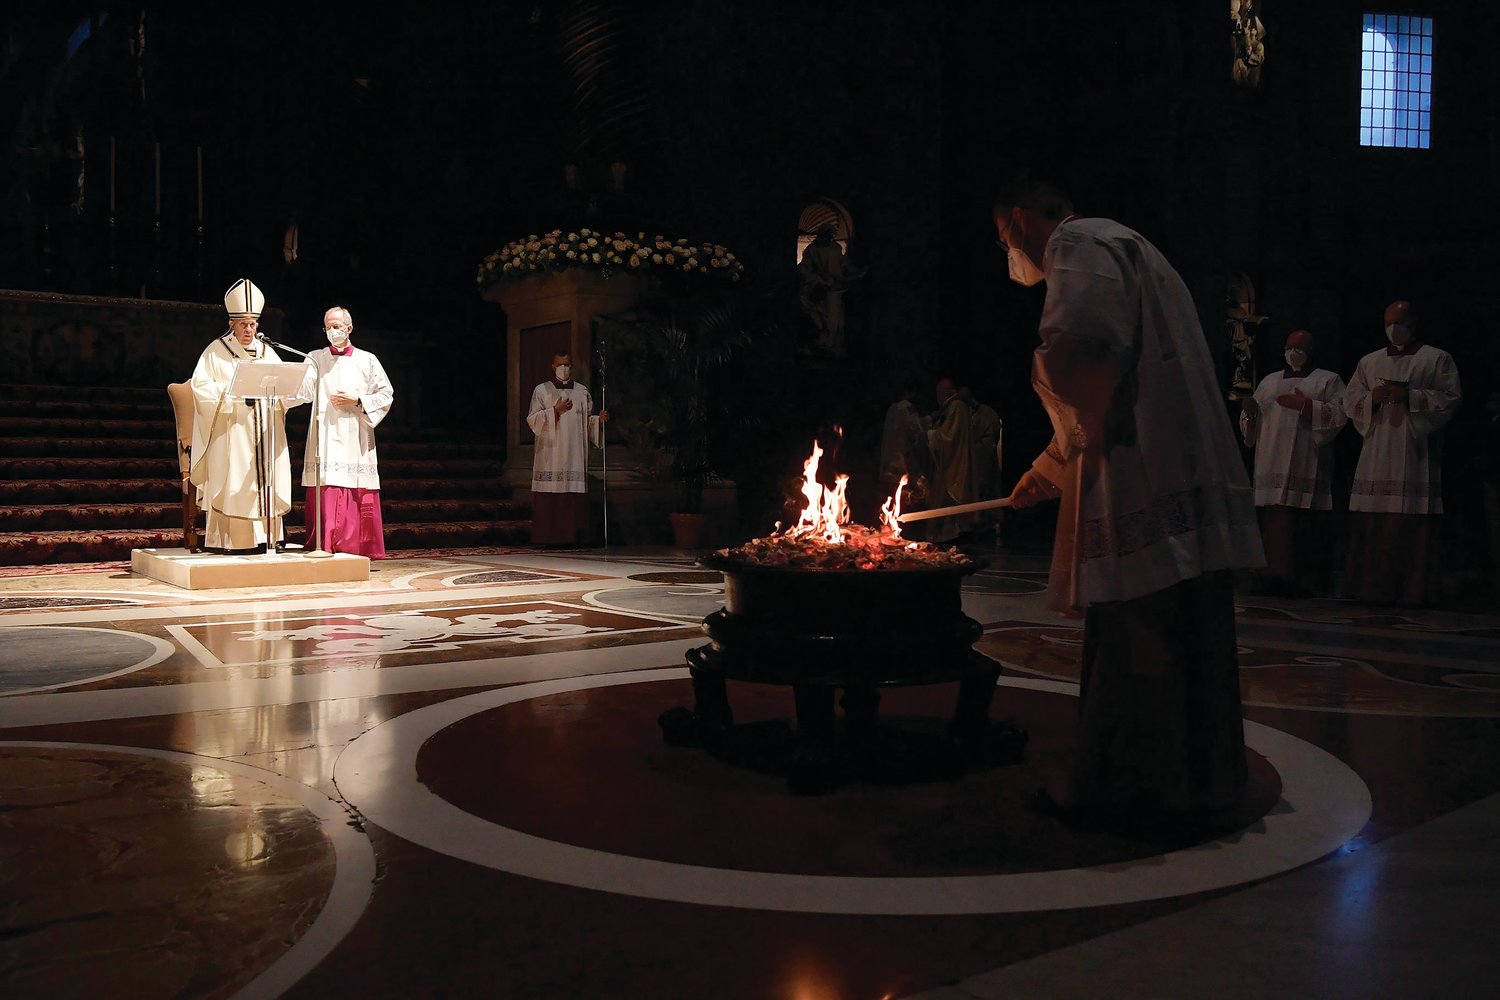 Pope Francis celebrates the Easter Vigil in St. Peter's Basilica at the Vatican April 3, 2021. In his homily, the pope said, "It is always possible to begin anew."